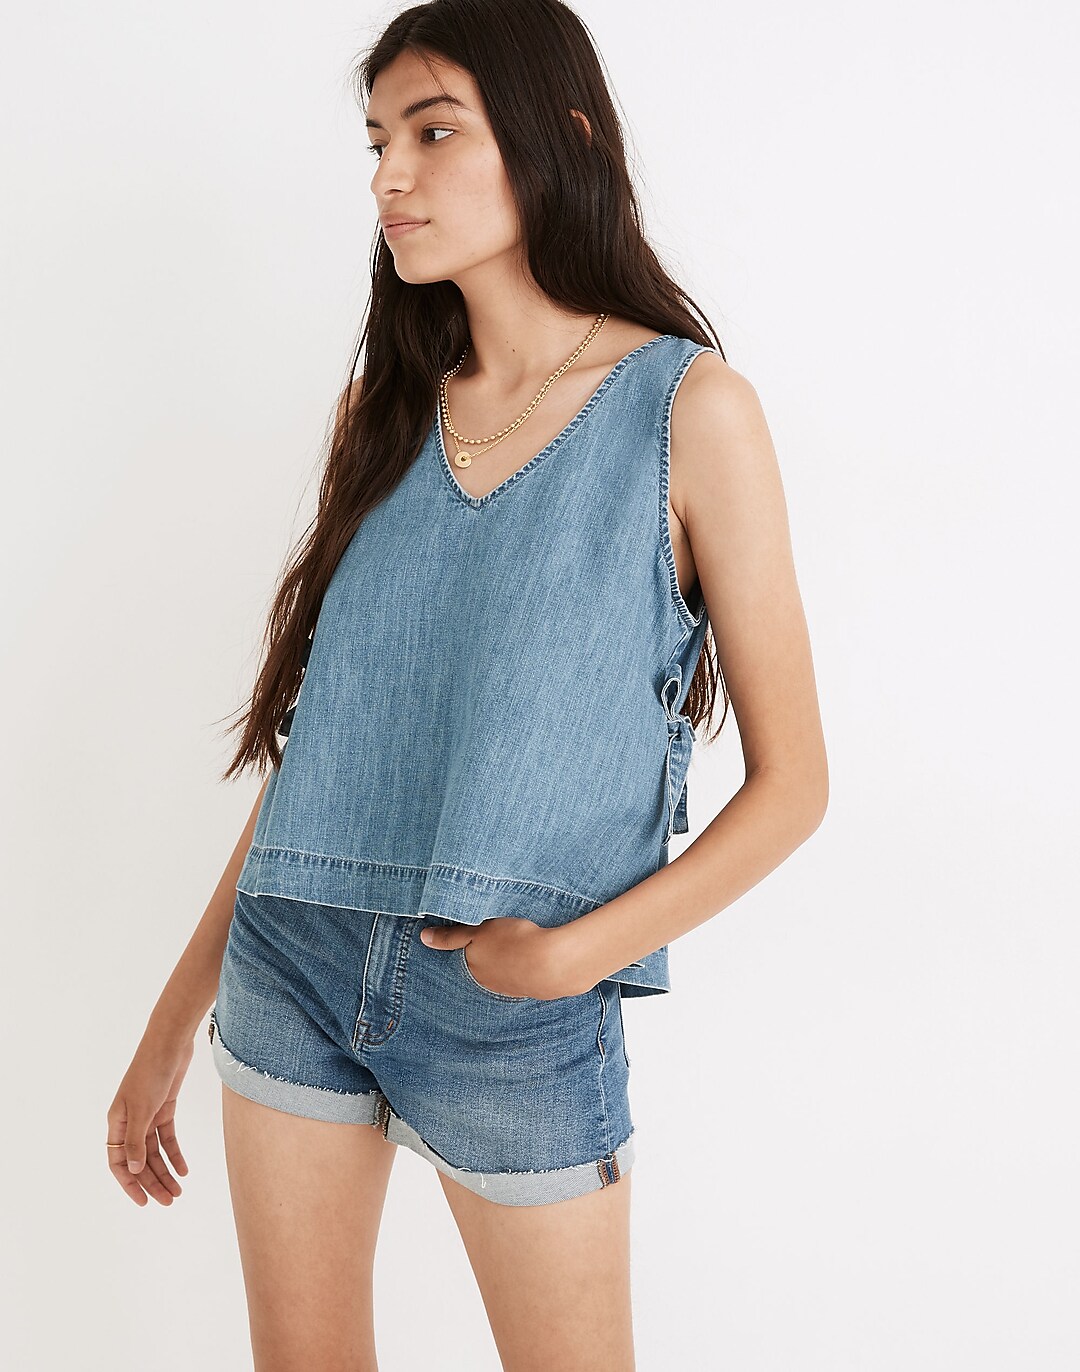 Denim Outfits Are Trending In A Big Way — This Is My Go-To - The